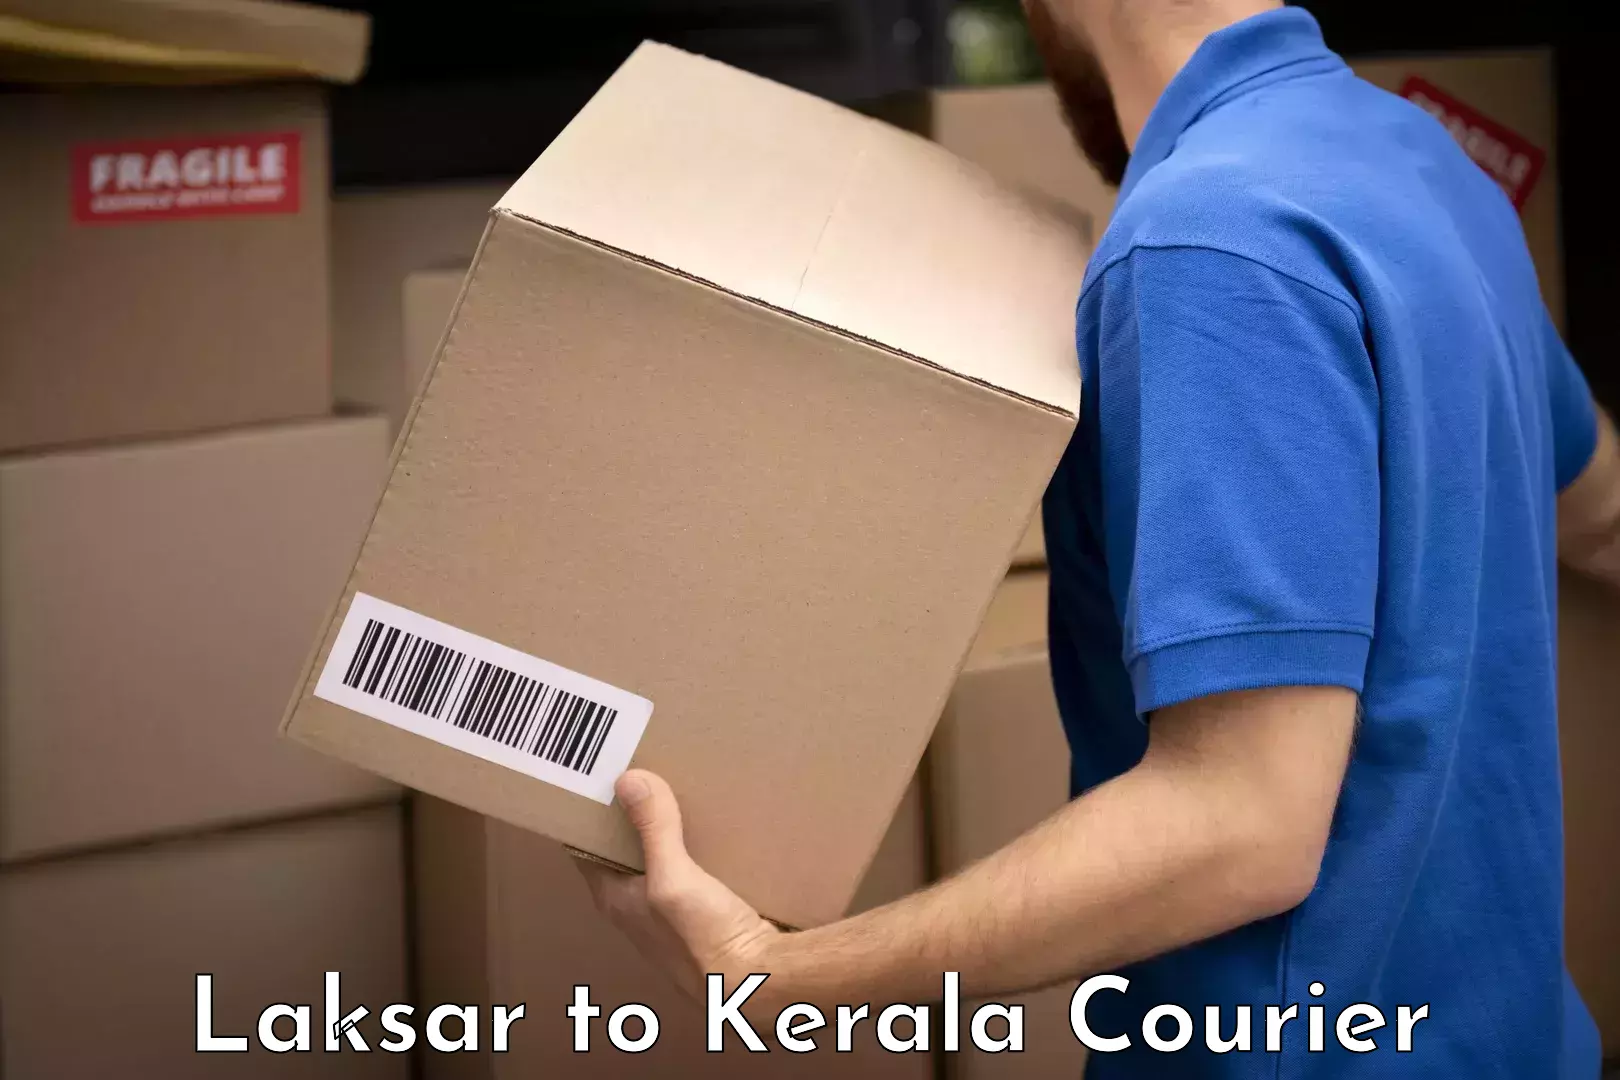 Luggage delivery network Laksar to Kerala